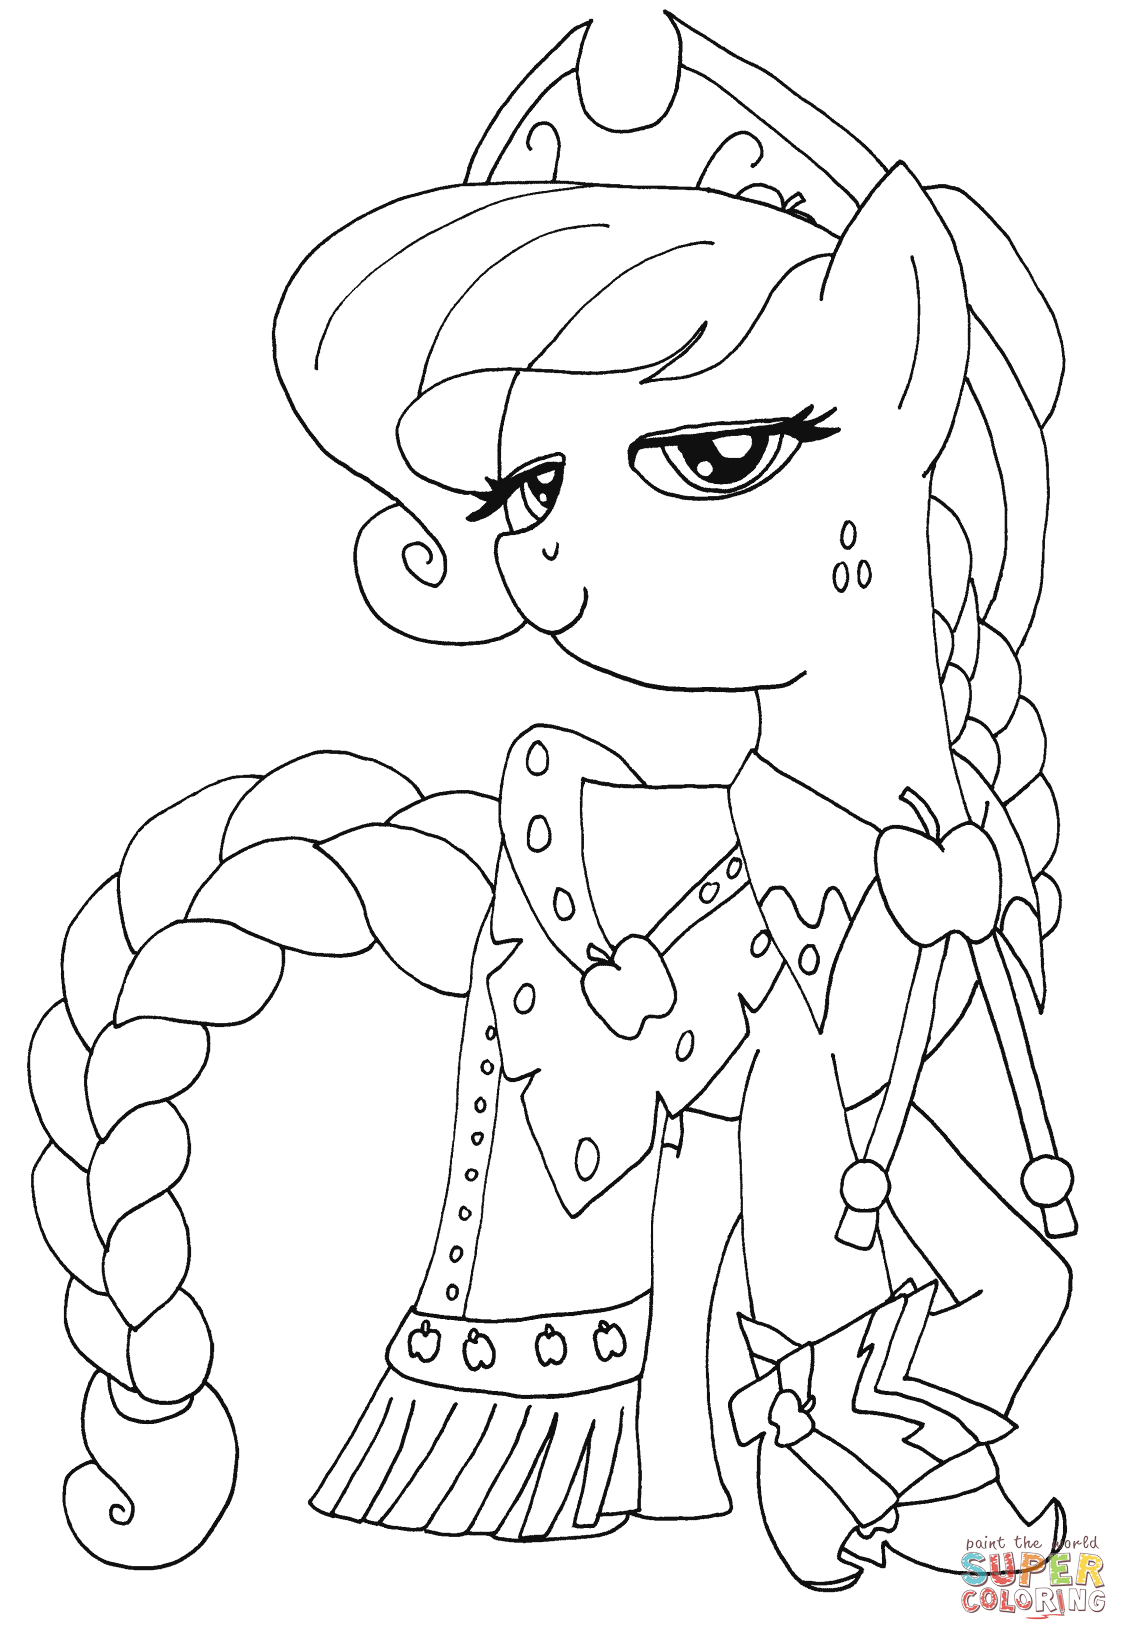 Princess Applejack from My Little Pony Coloring Page - My Little Pony